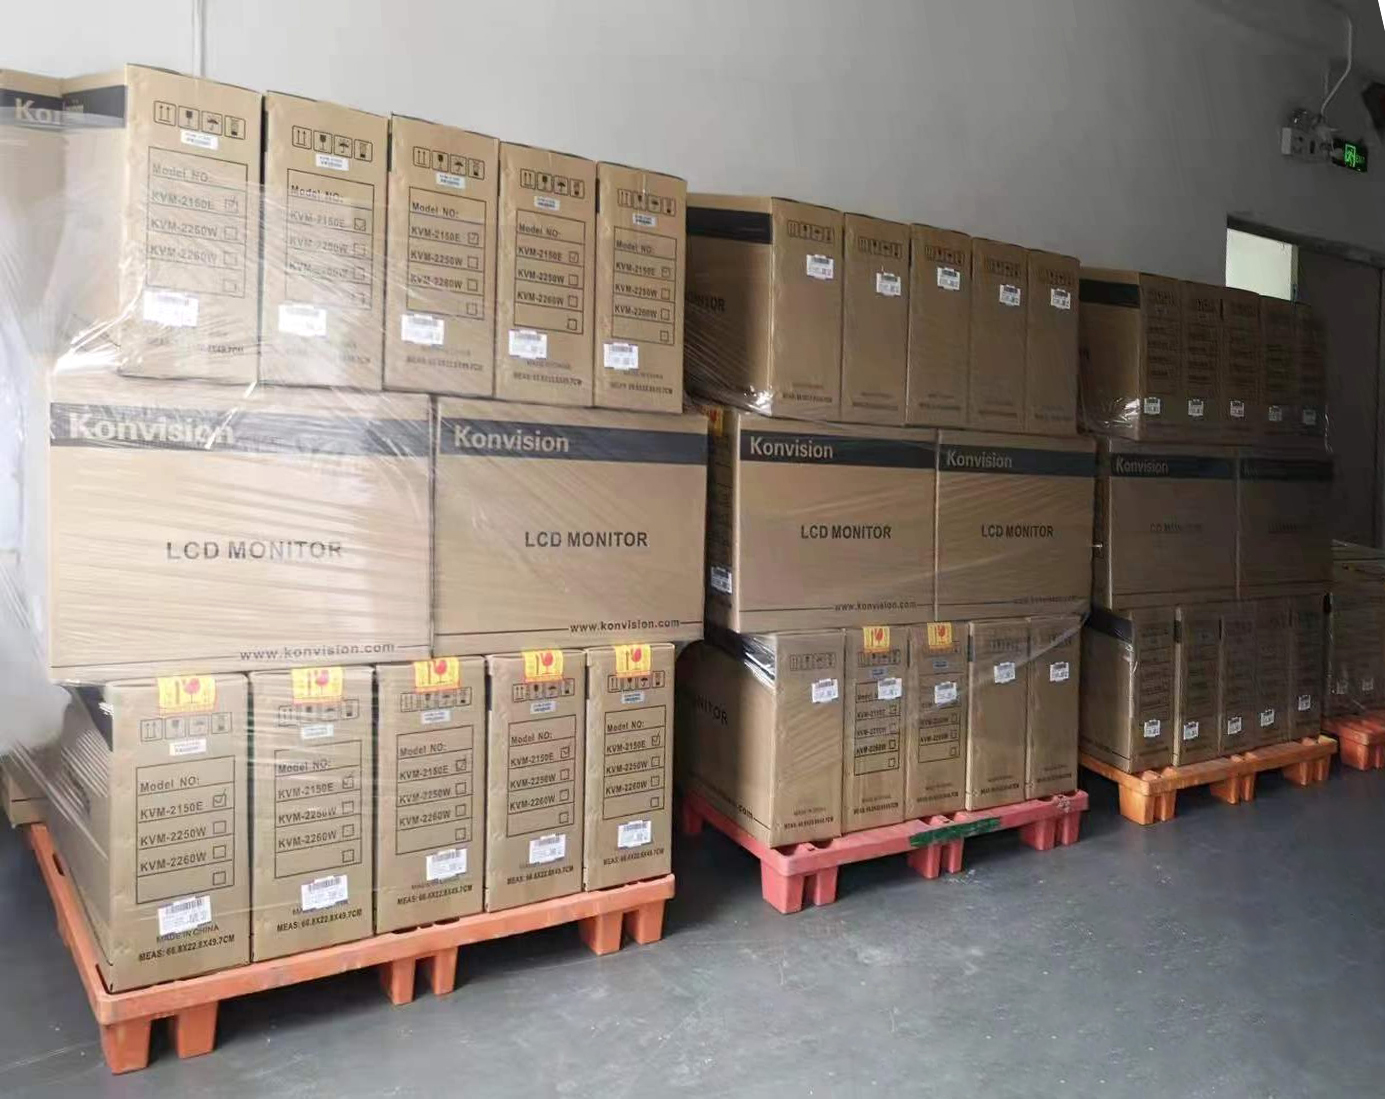 70 pcs Konvision monitors for the 2022 Beijing Winter Olympics were delivered to Beijing